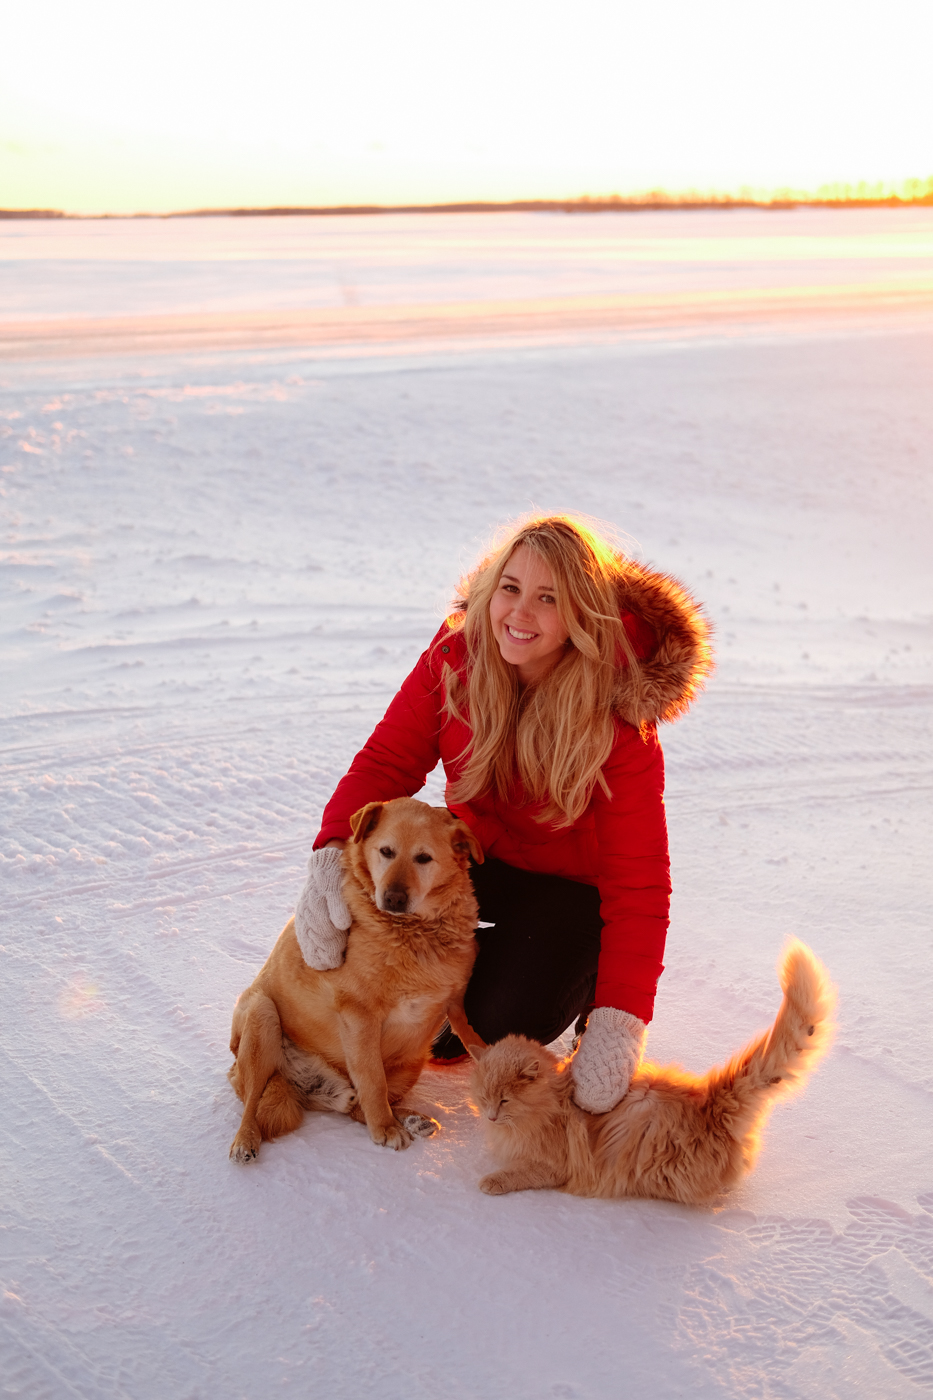 Debora Dahl wearing a red coat in the snow with the sunset behind her with a dog and a cat